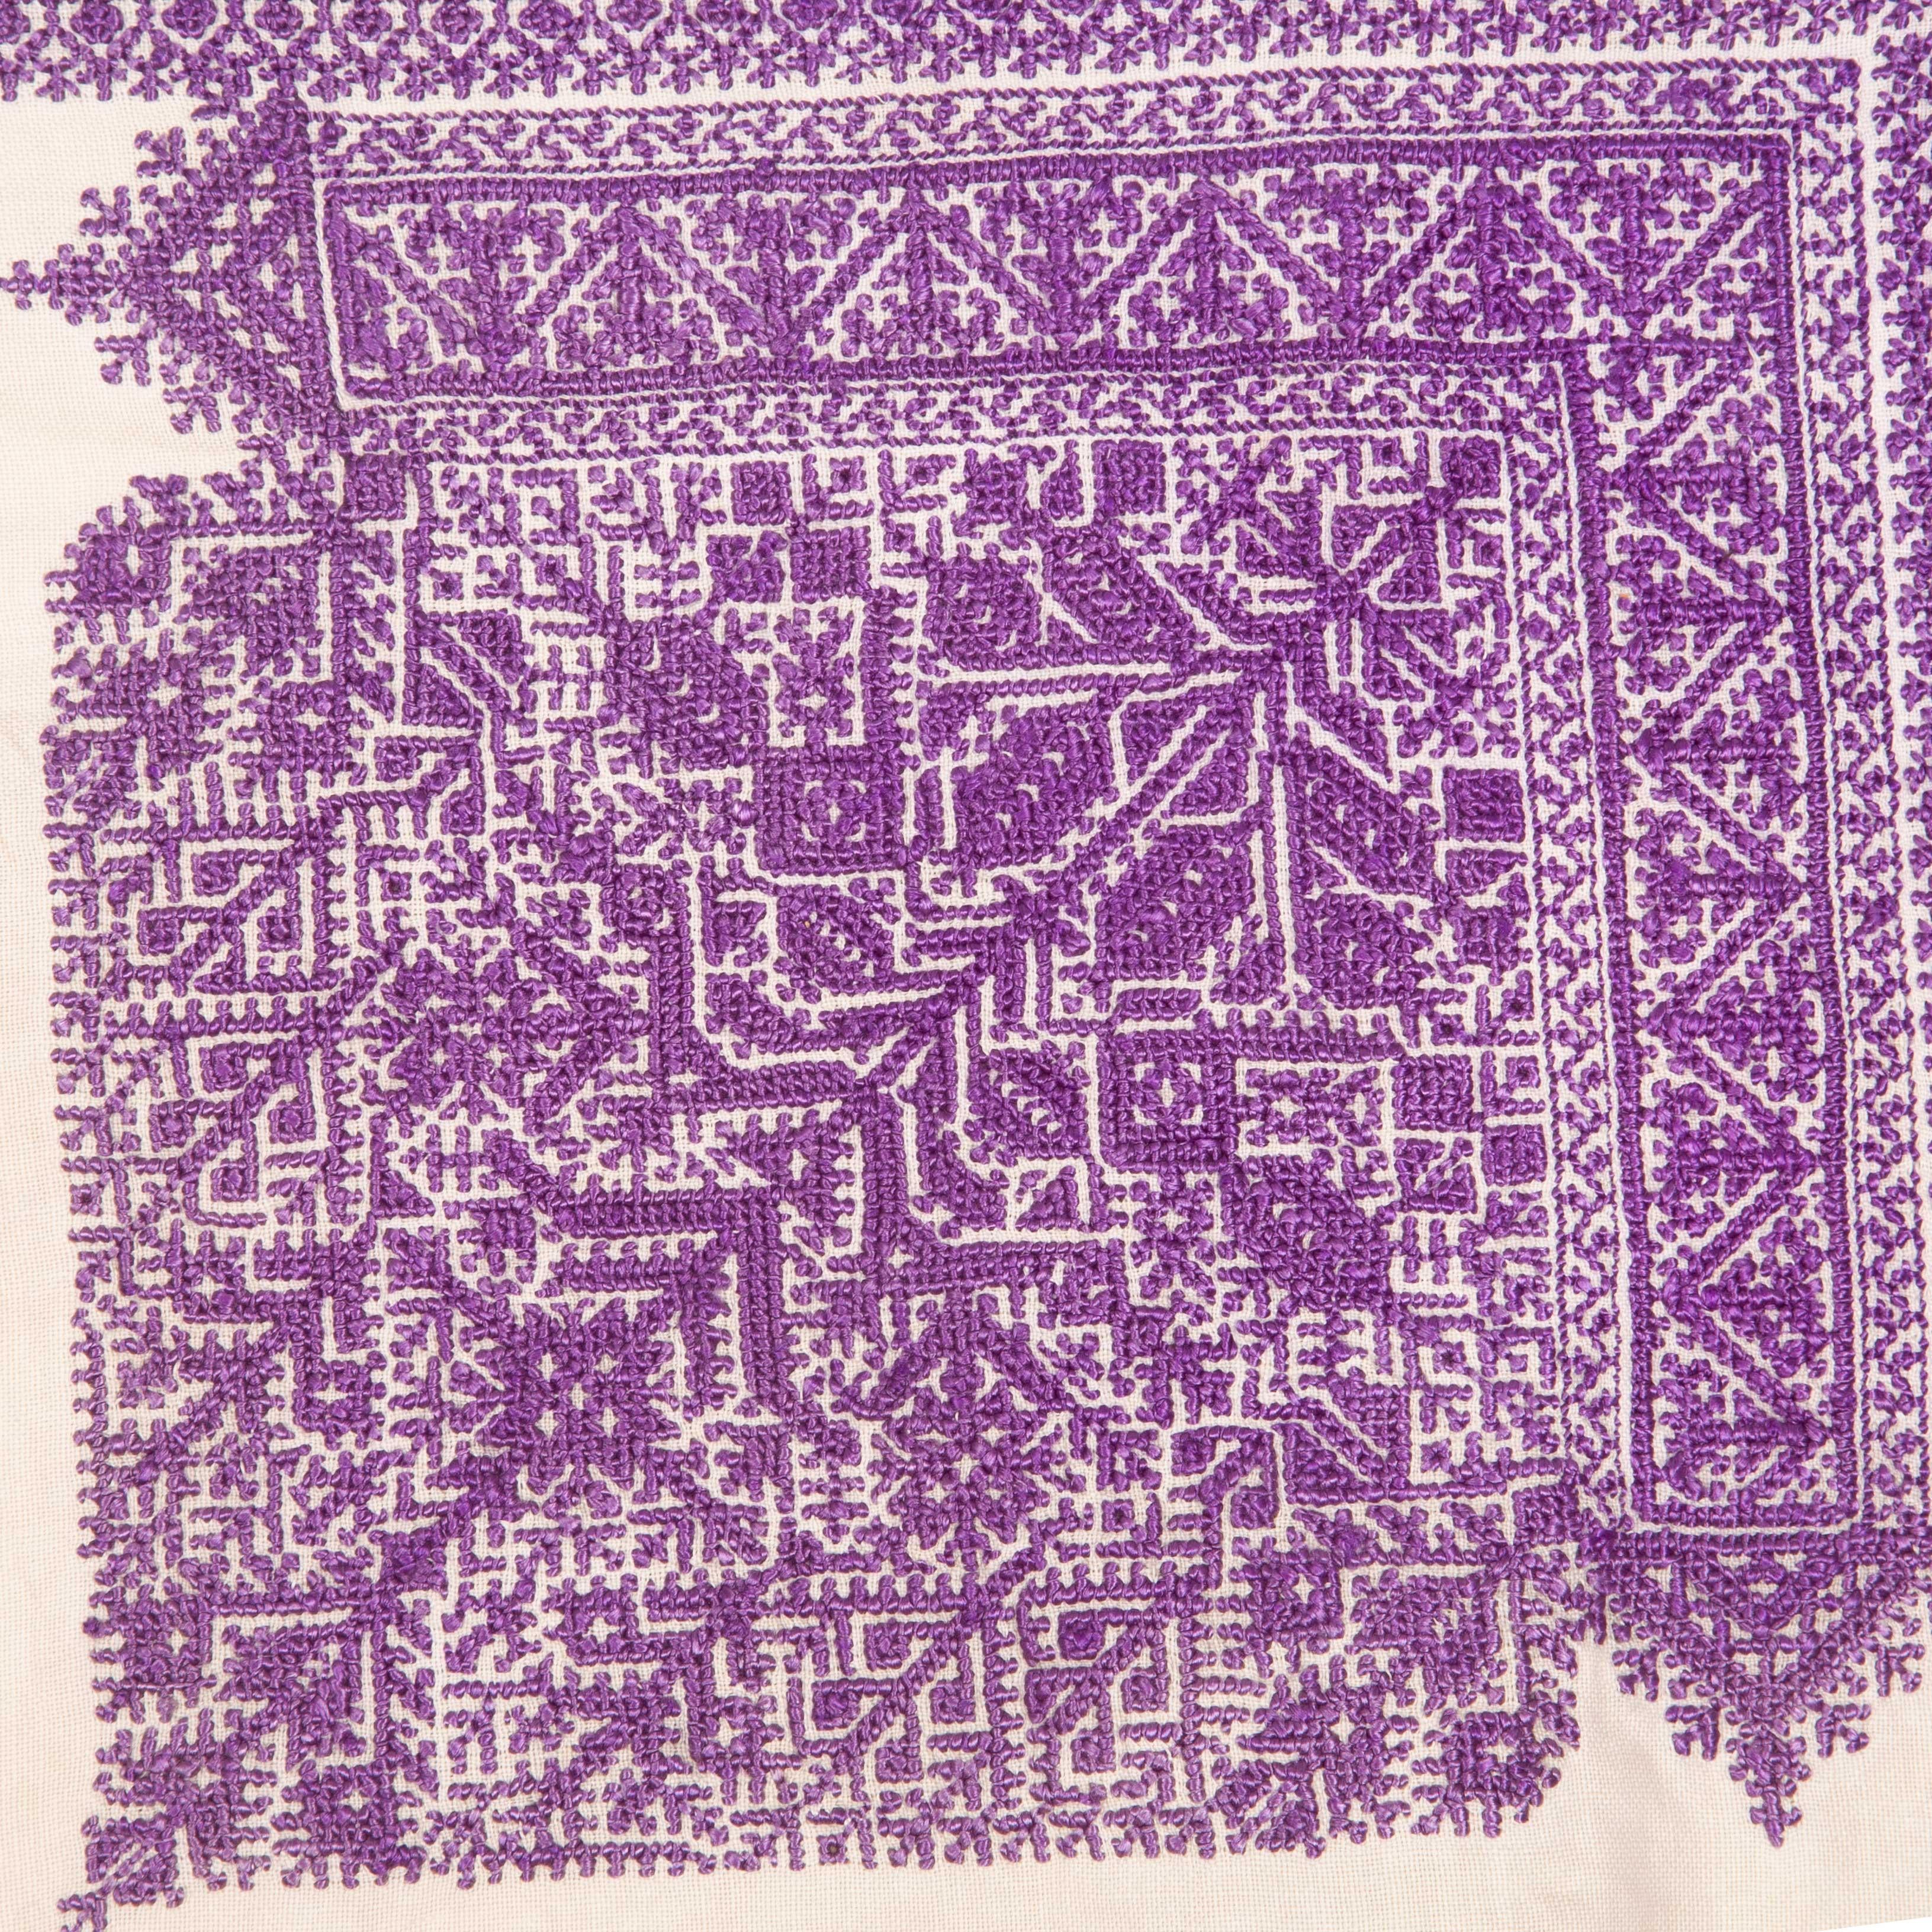 Antique Fez Embroidered Seat Cover 'Gelsa' from Morocco, Early 20th Century For Sale 1